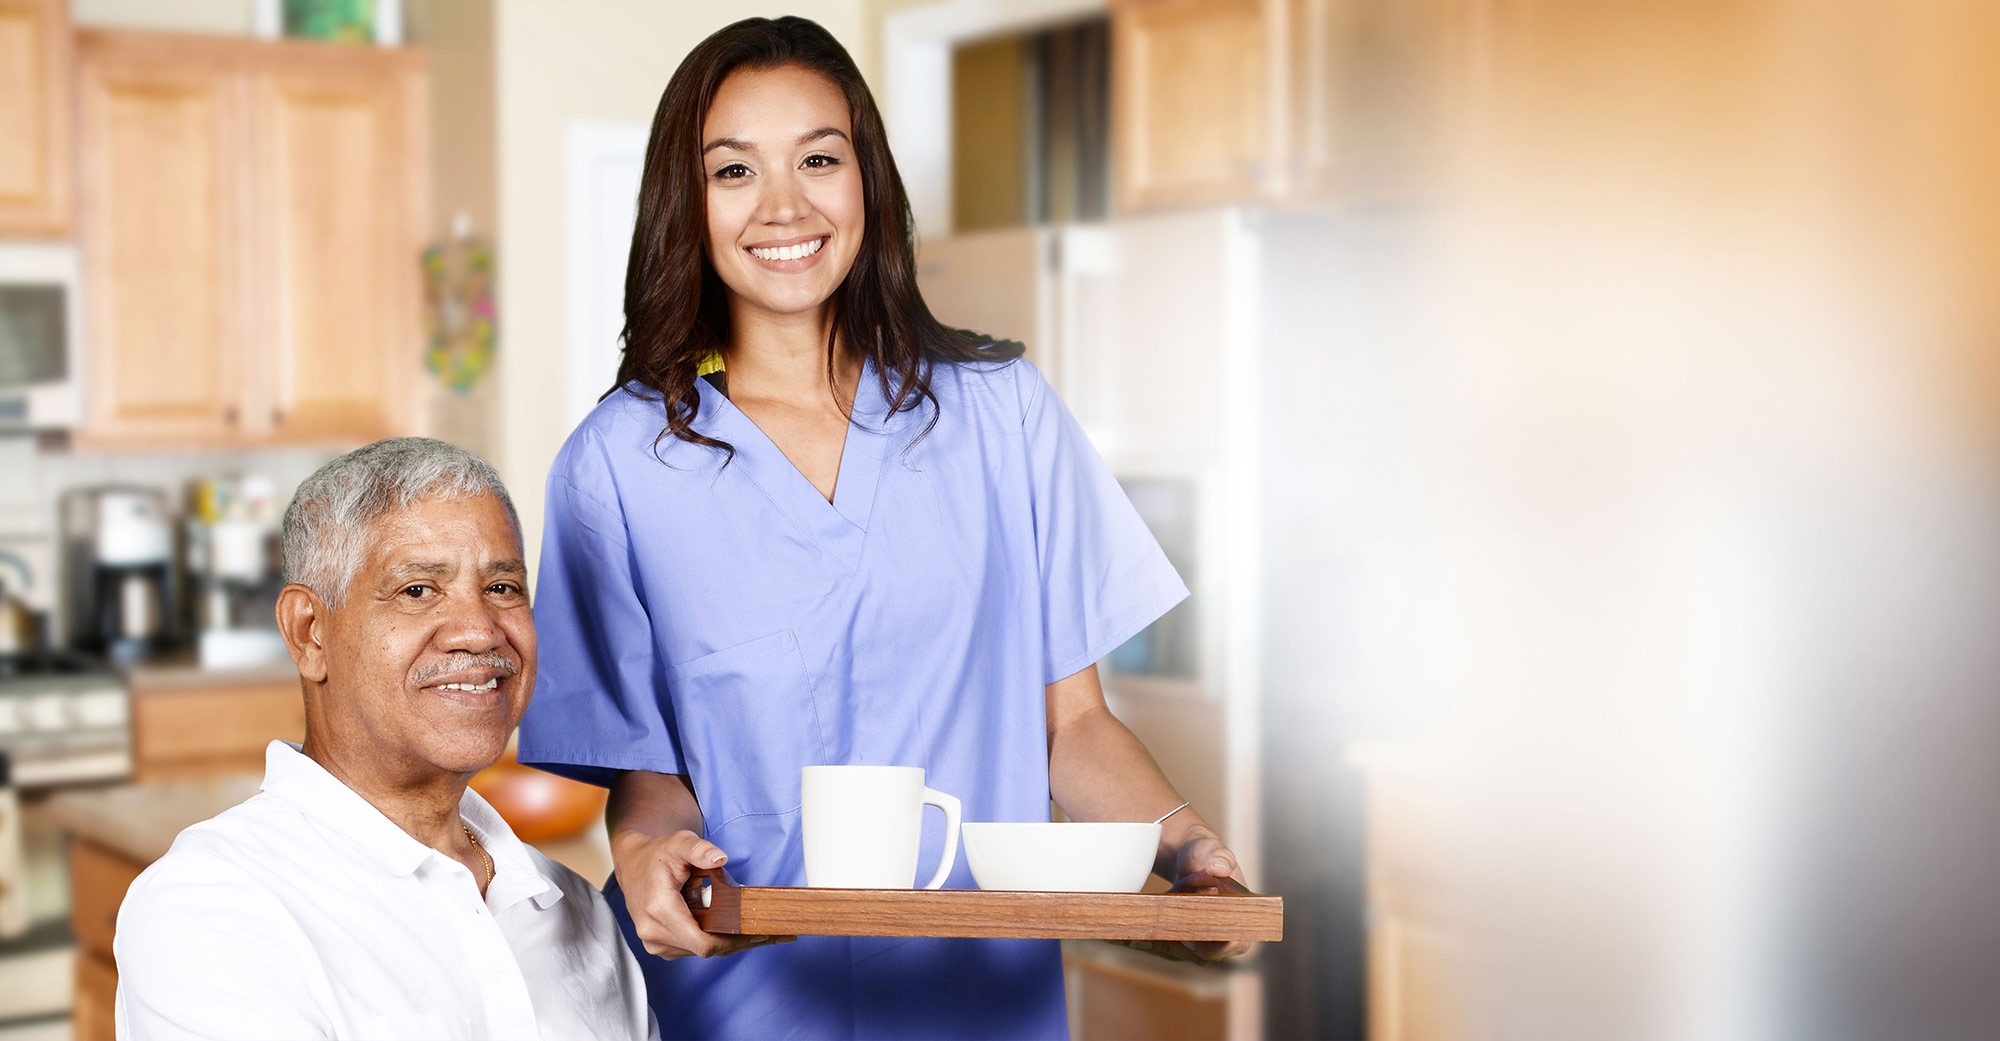 Complete HCMD - HomeCare Services in Maryland | Visit now